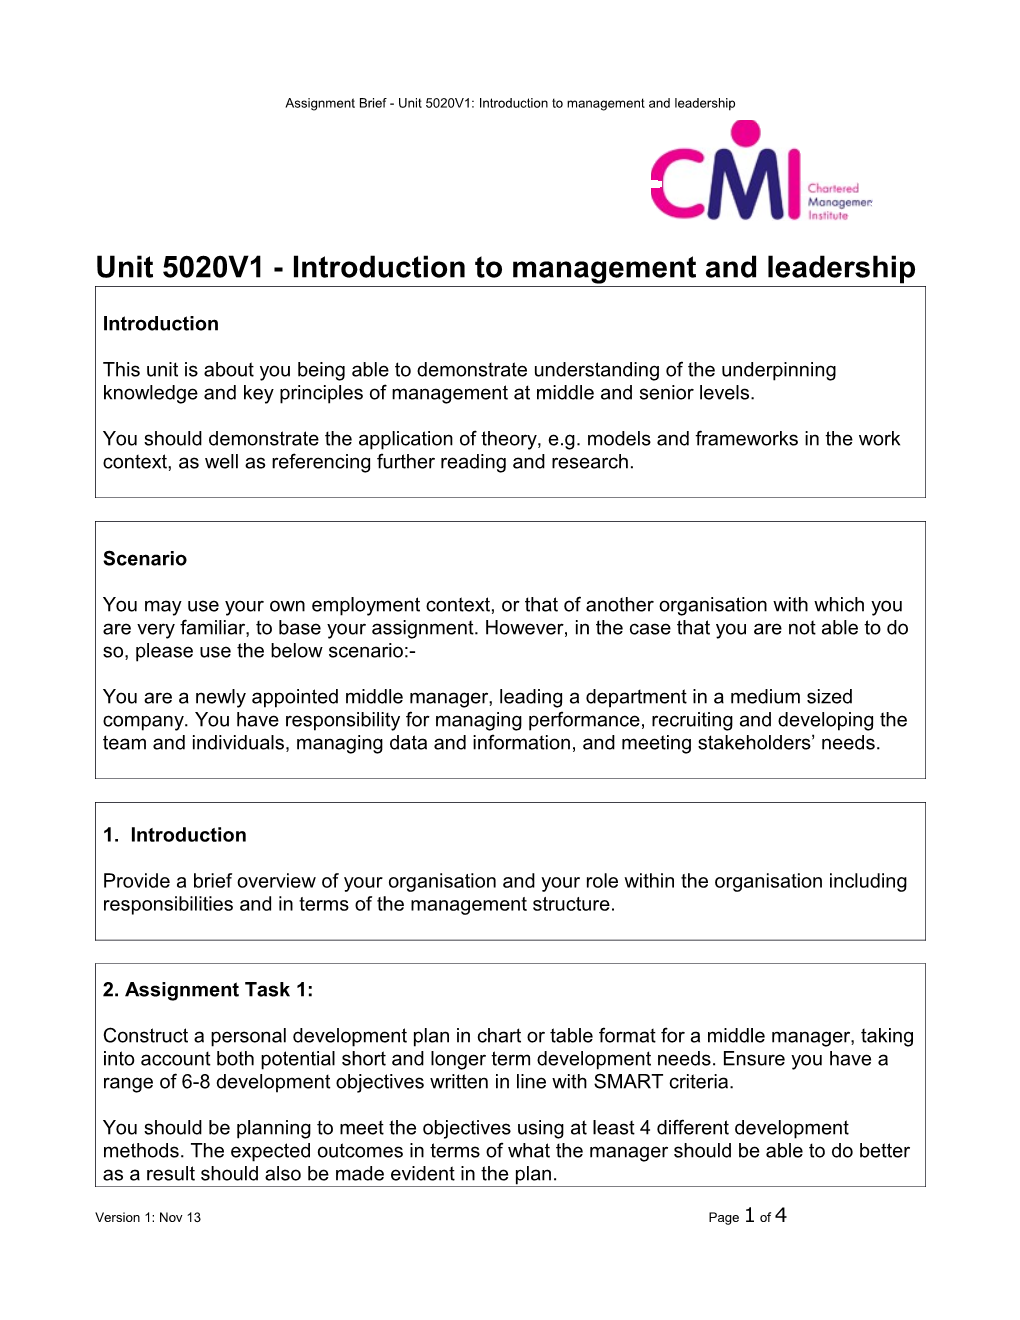 Unit 5020V1 - Introduction to Management and Leadership